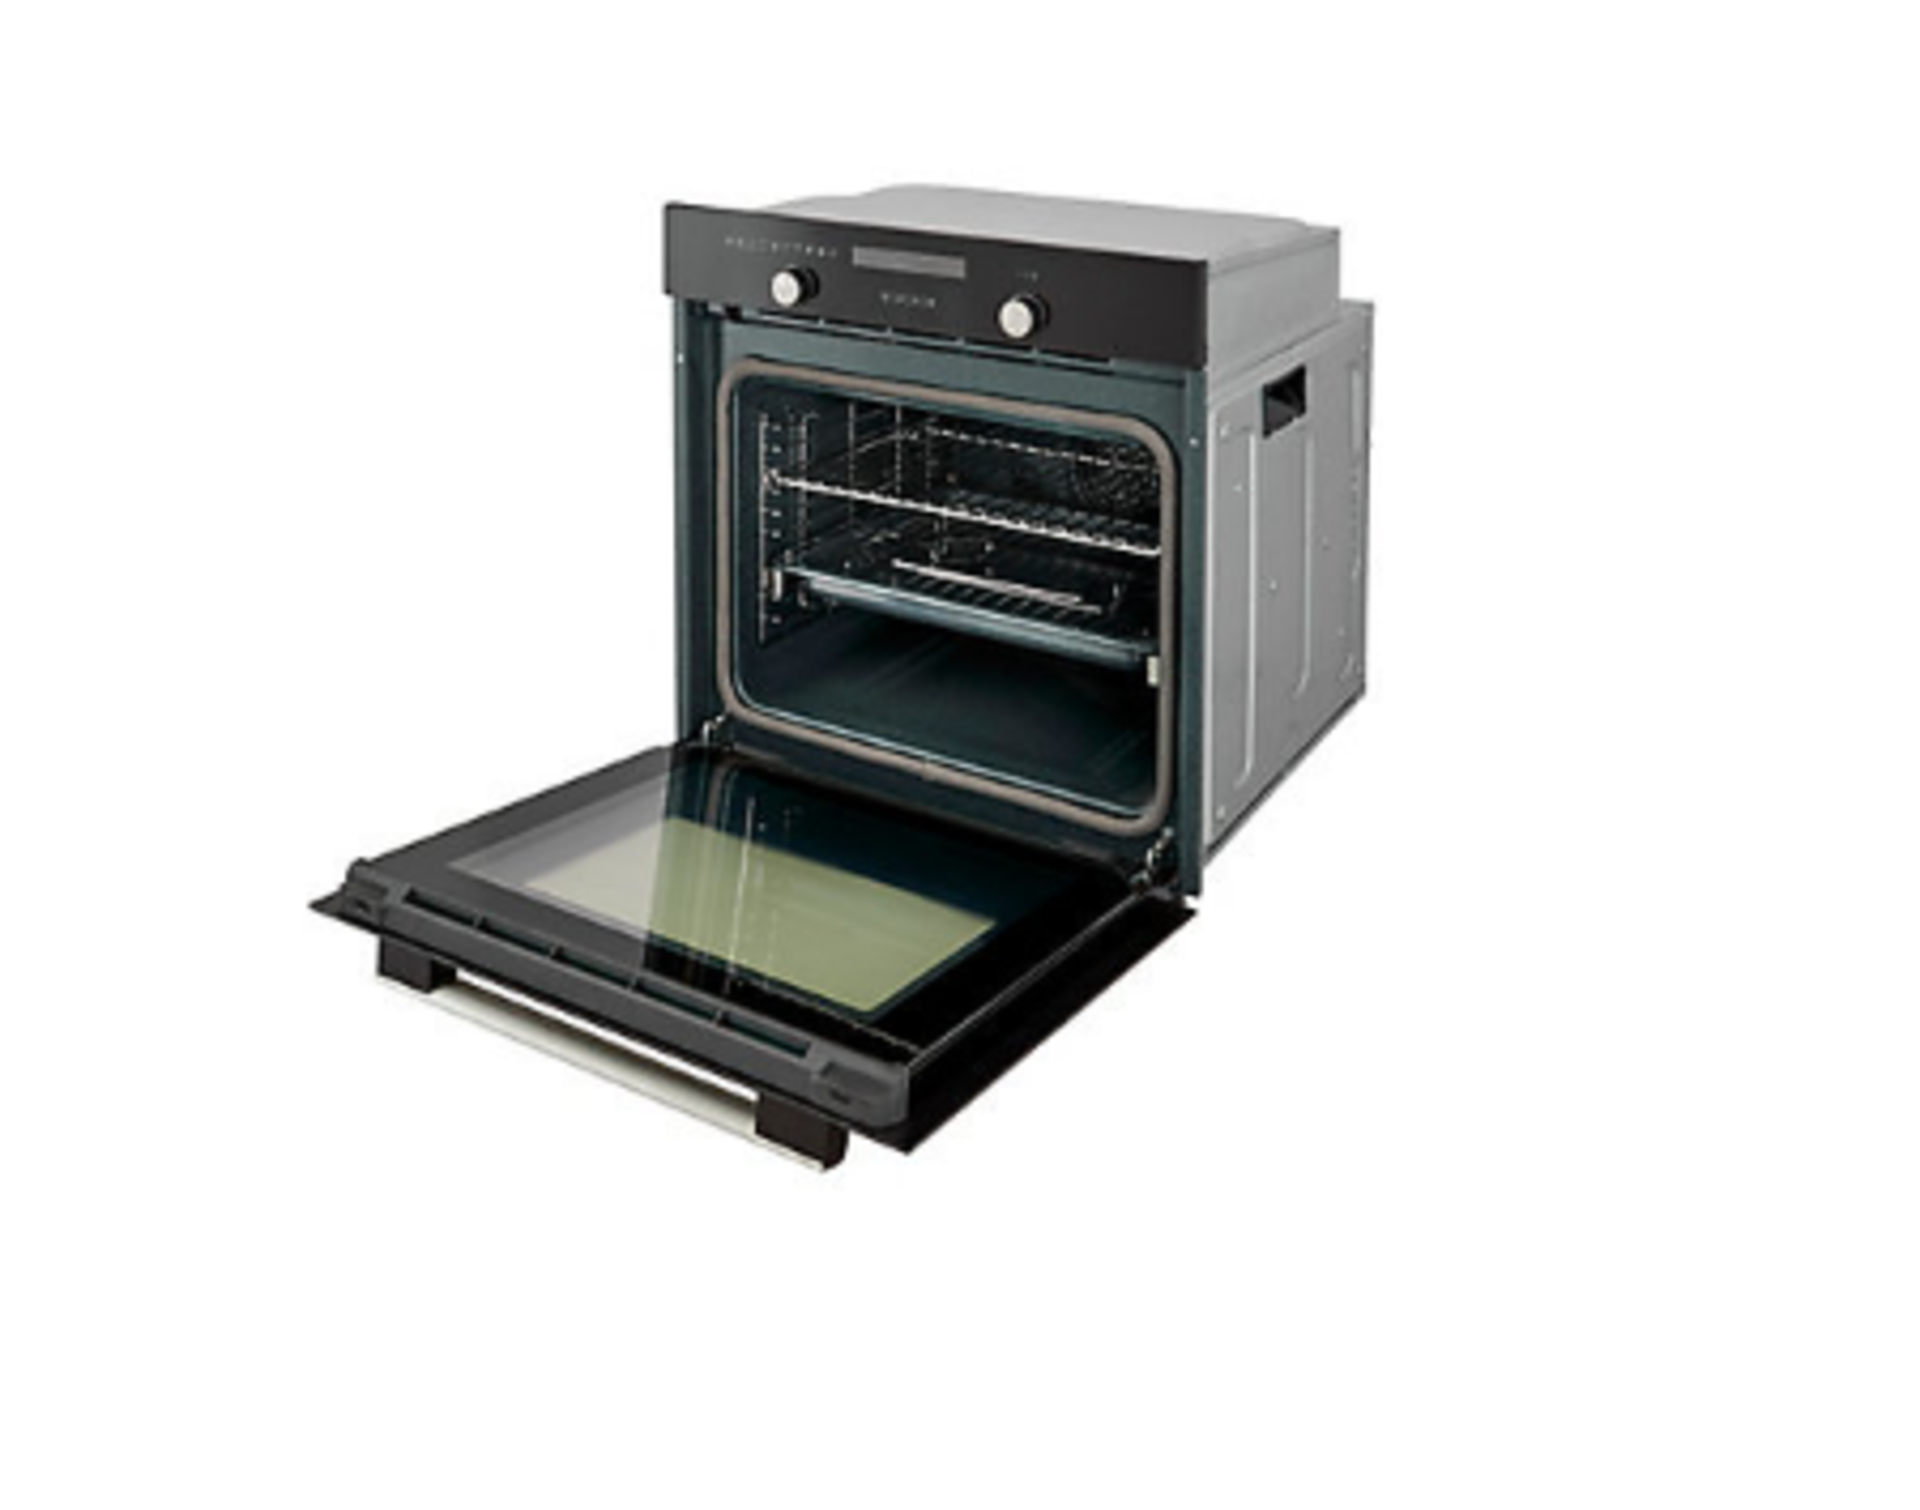 Cooke & Lewis CLPYBLa Built-in Single Multifunction Oven - Black. - ER45. RRP £435.00. This - Image 2 of 2